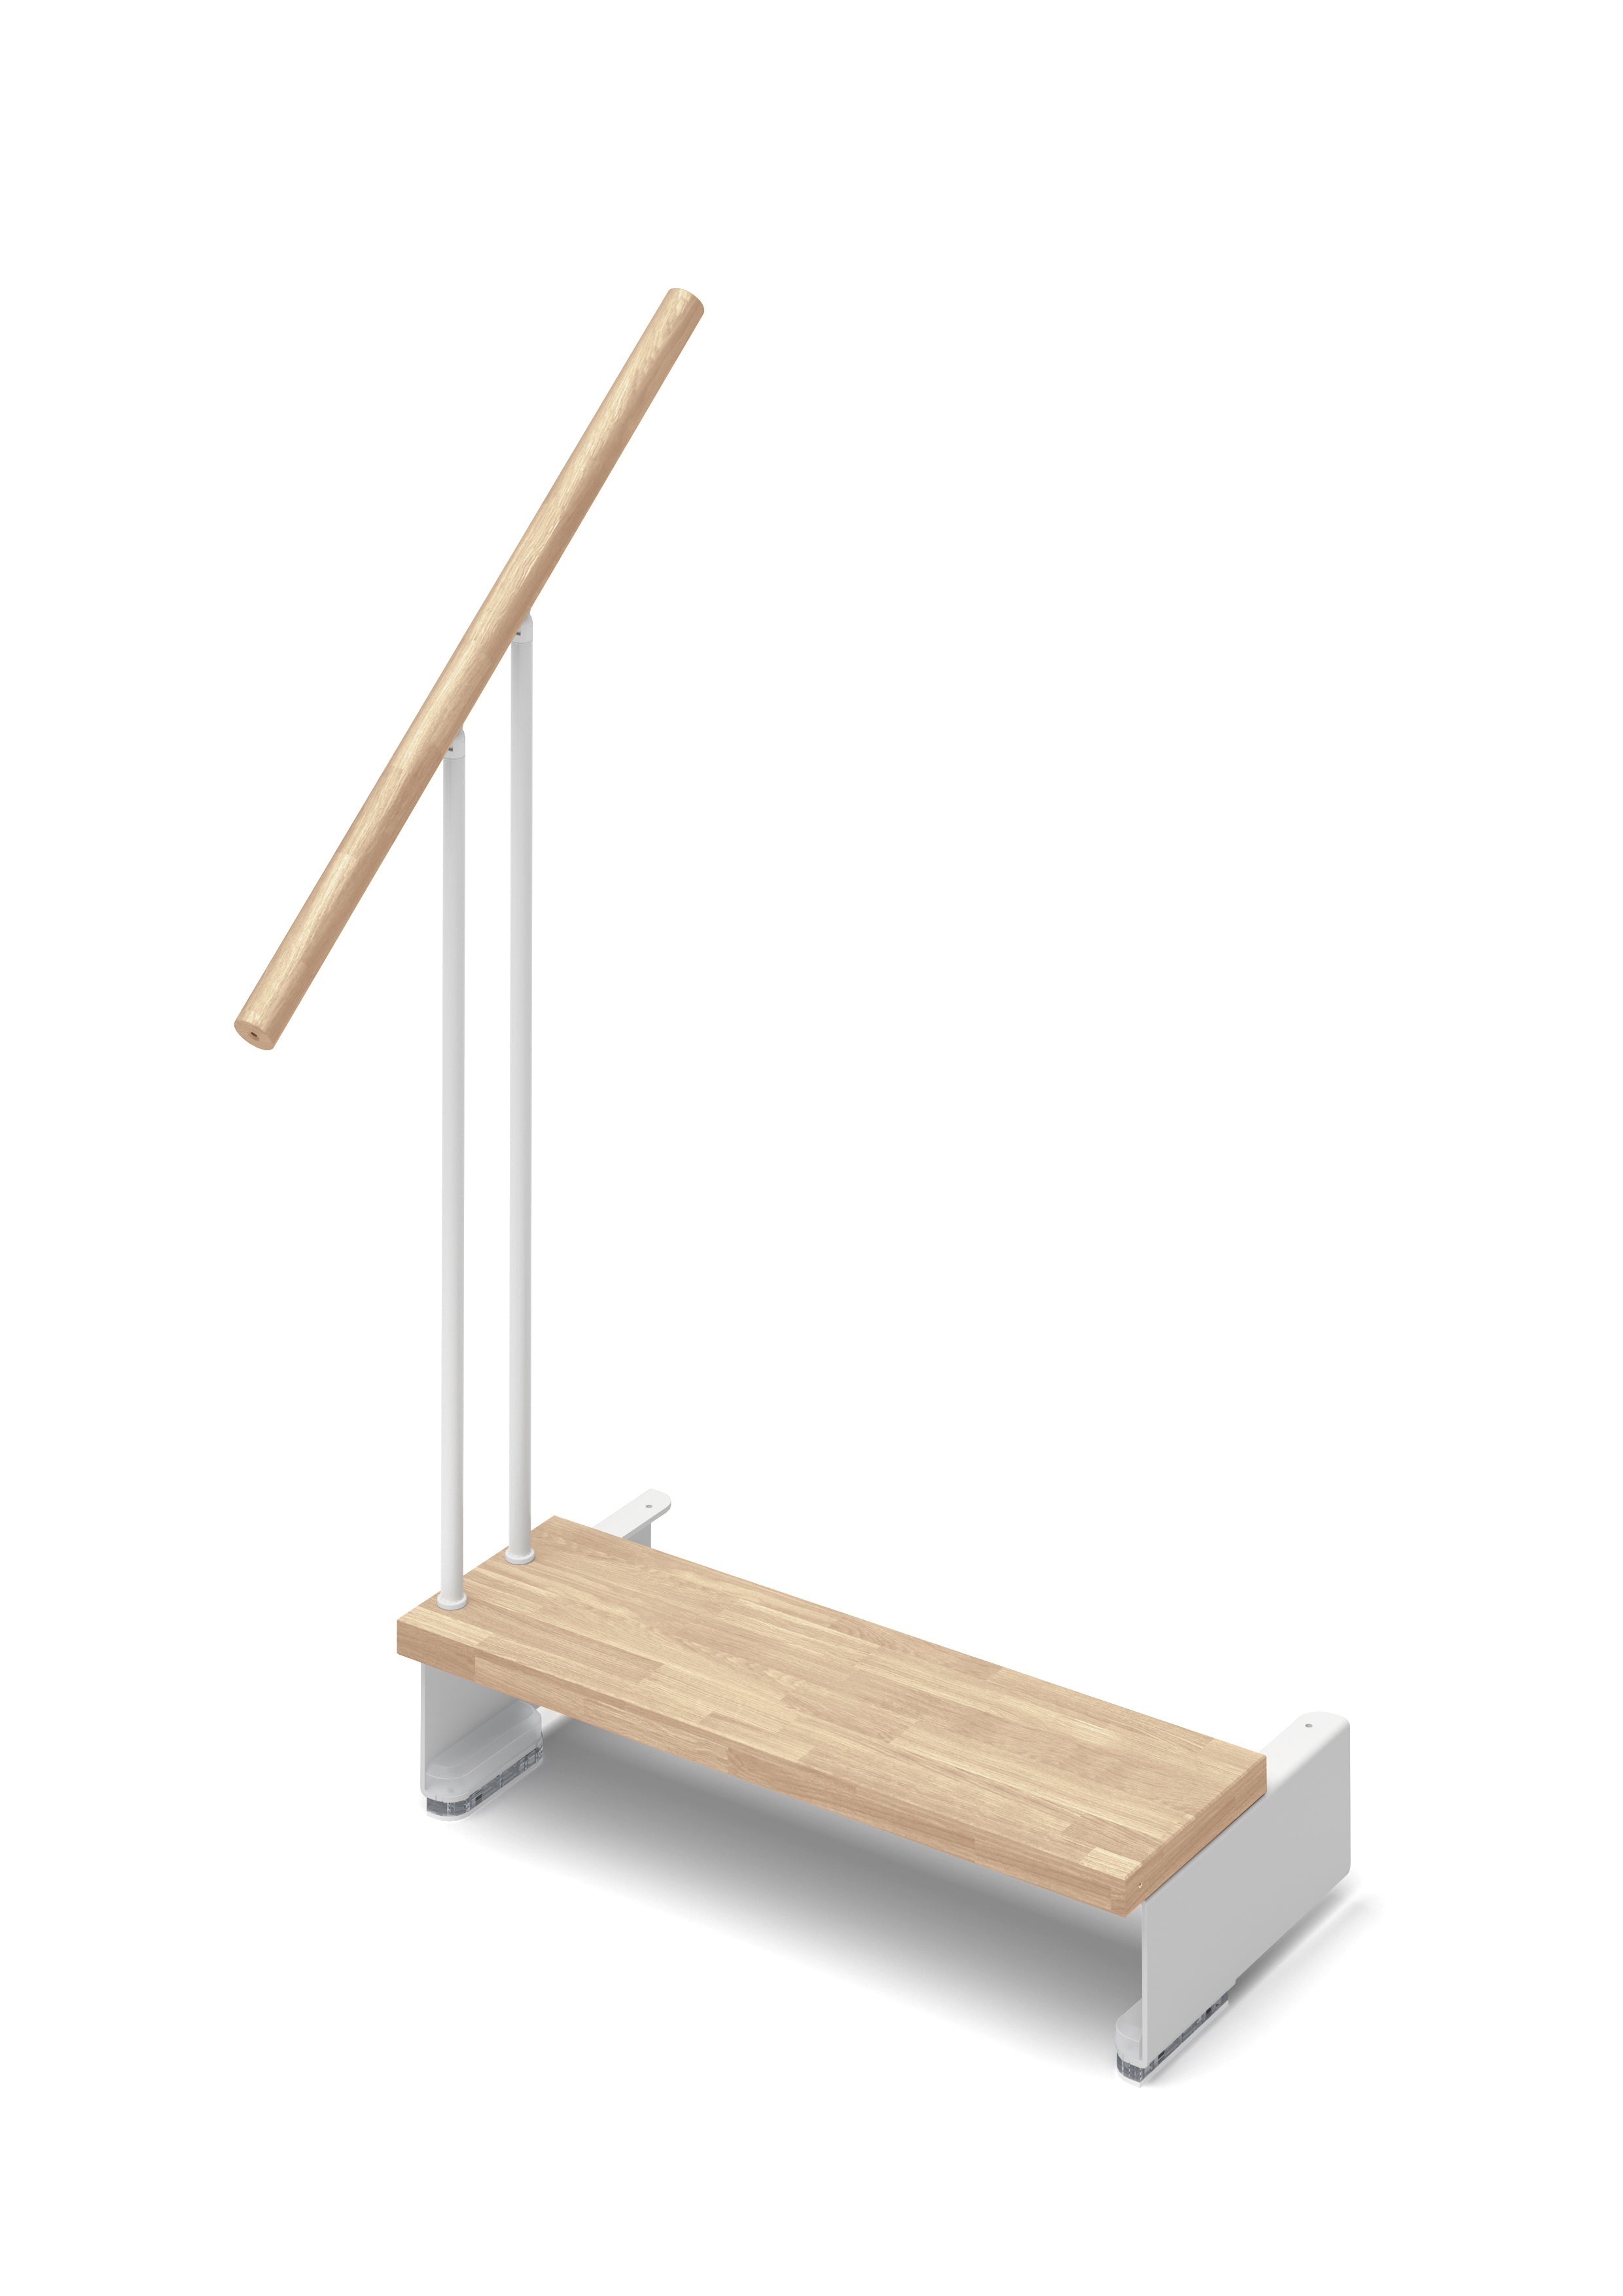 Additional step Adapta 84cm (with structure and railing) - Sand 27